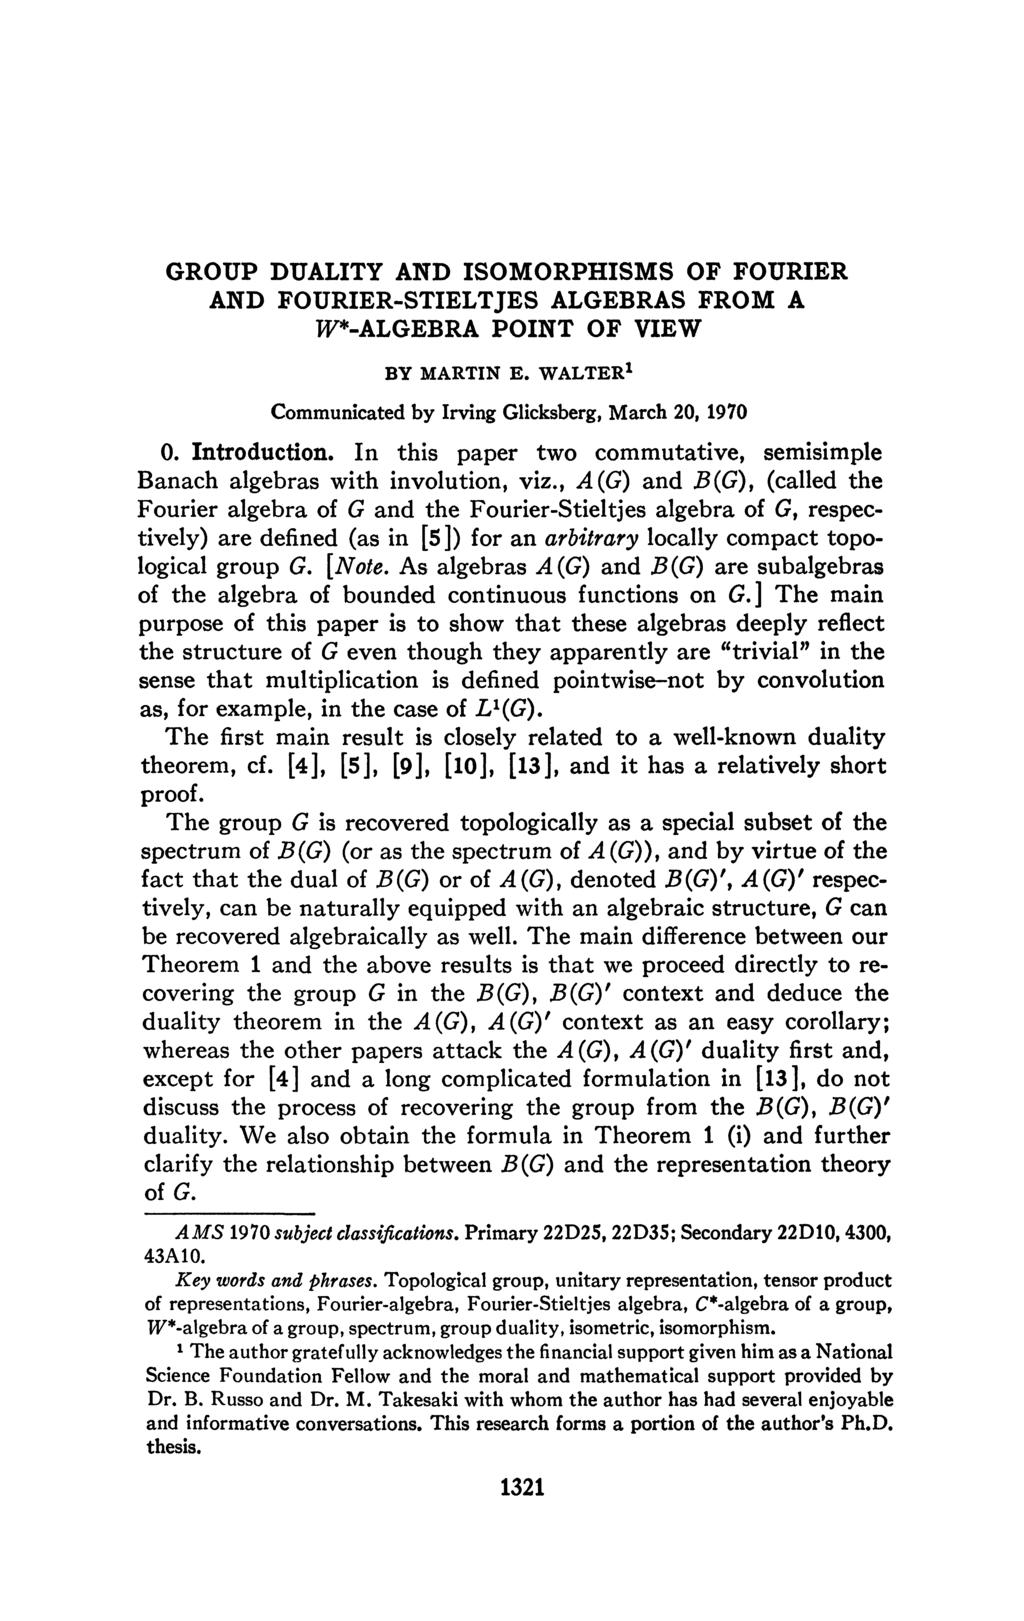 GROUP DUALITY AND ISOMORPHISMS OF FOURIER AND FOURIER-STIELTJES ALGEBRAS FROM A W*-ALGEBRA POINT OF VIEW BY MARTIN E. WALTER 1 Communicated by Irving Glicksberg, March 20, 1970 0. Introduction.